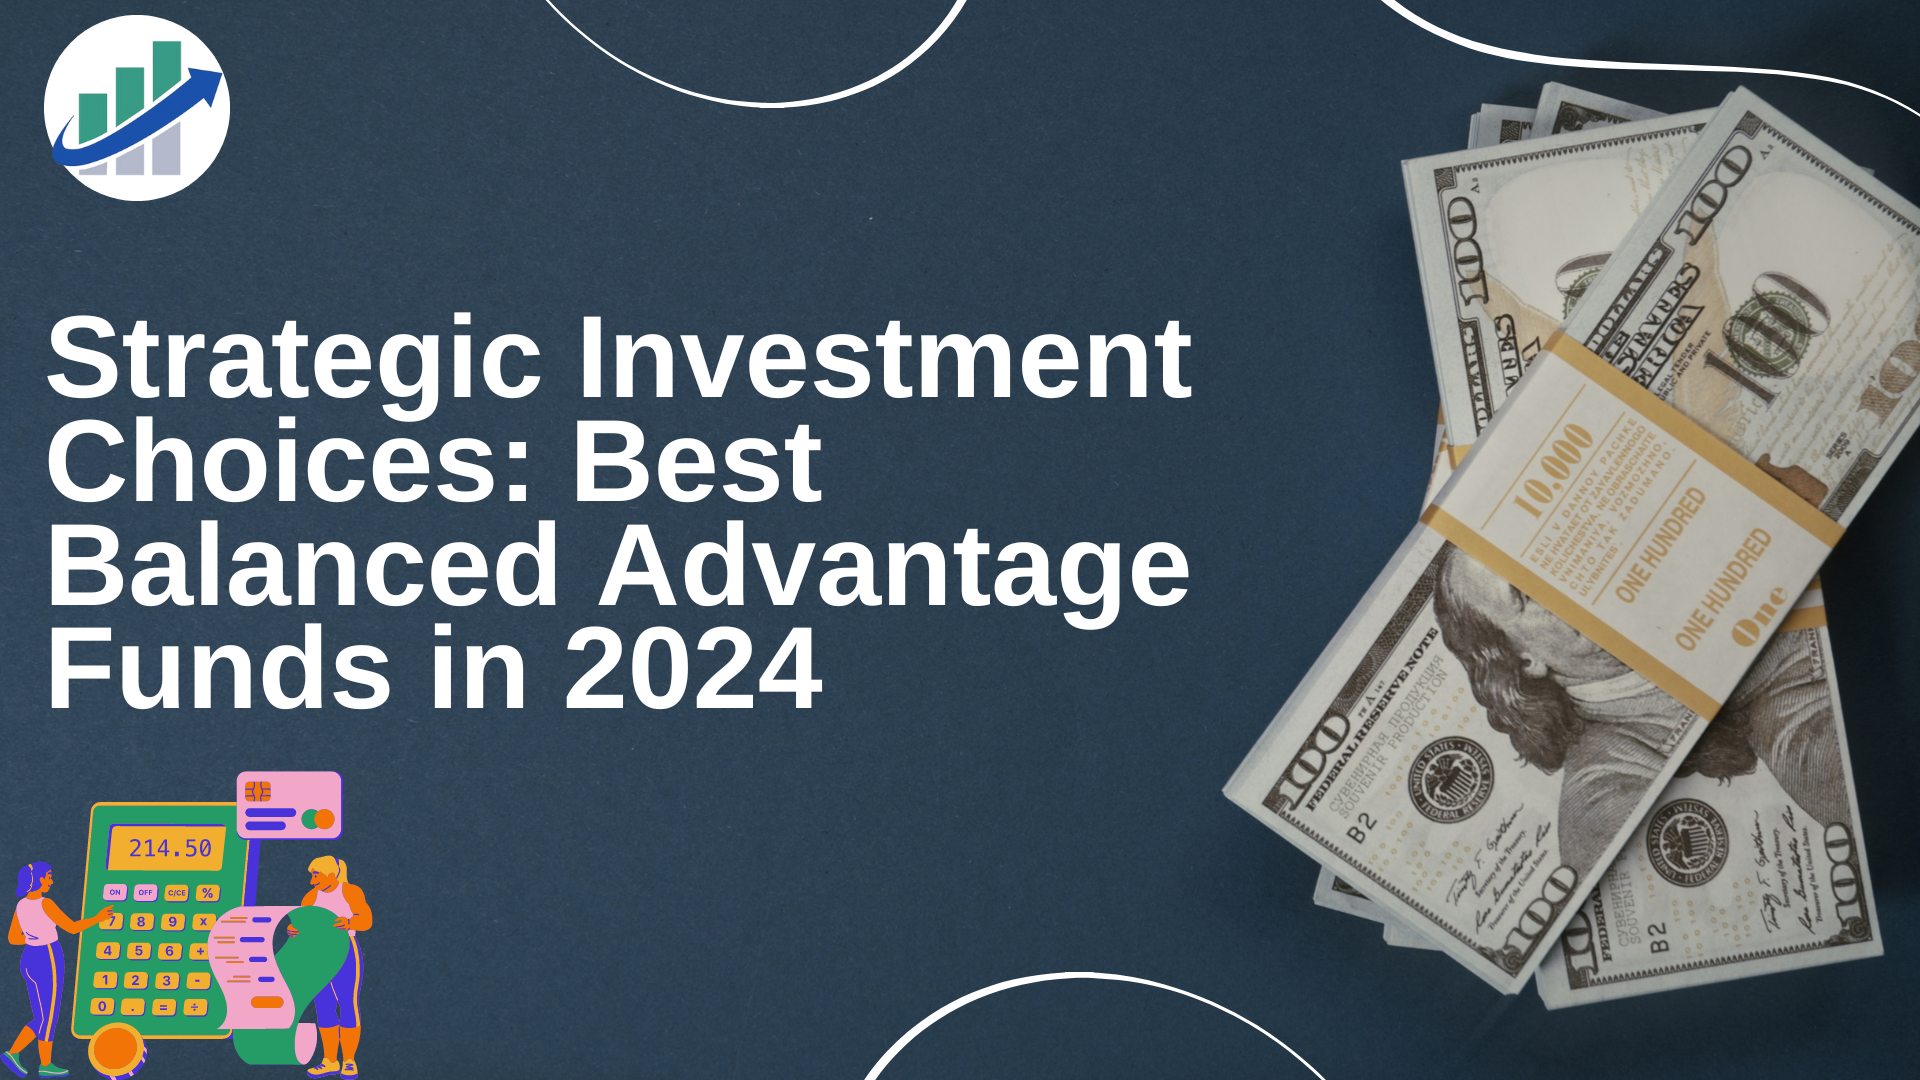 Strategic Investment Choices: Best Balanced Advantage Funds in 2024